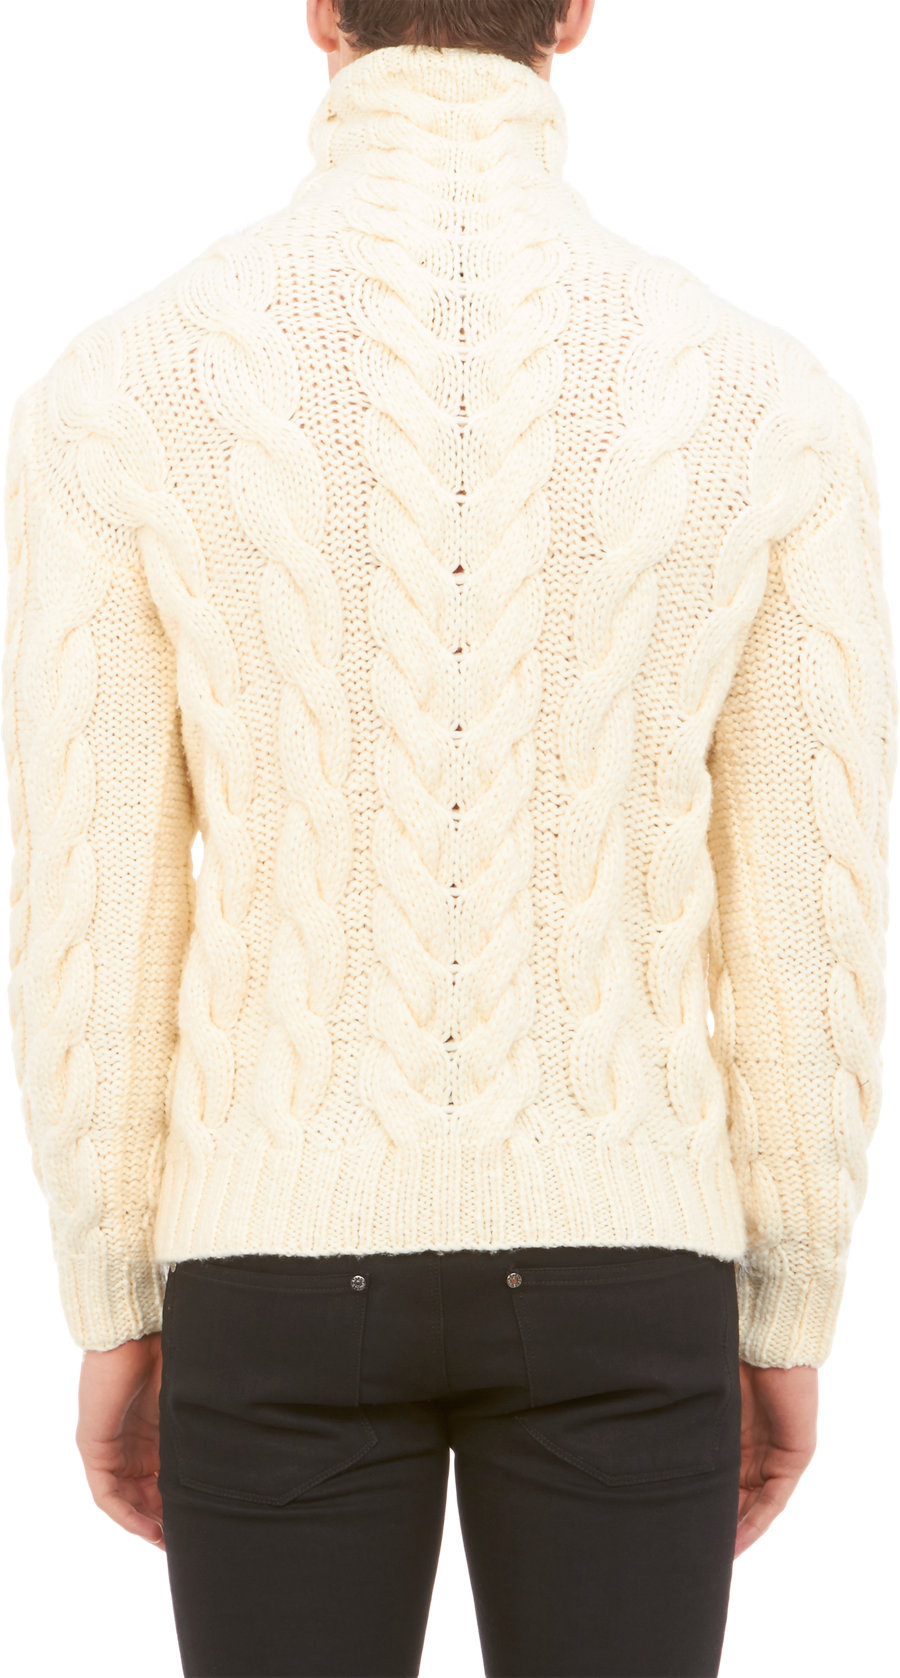 Ralph lauren black label Chunky Cableknit Turtleneck Pullover Sweater ...